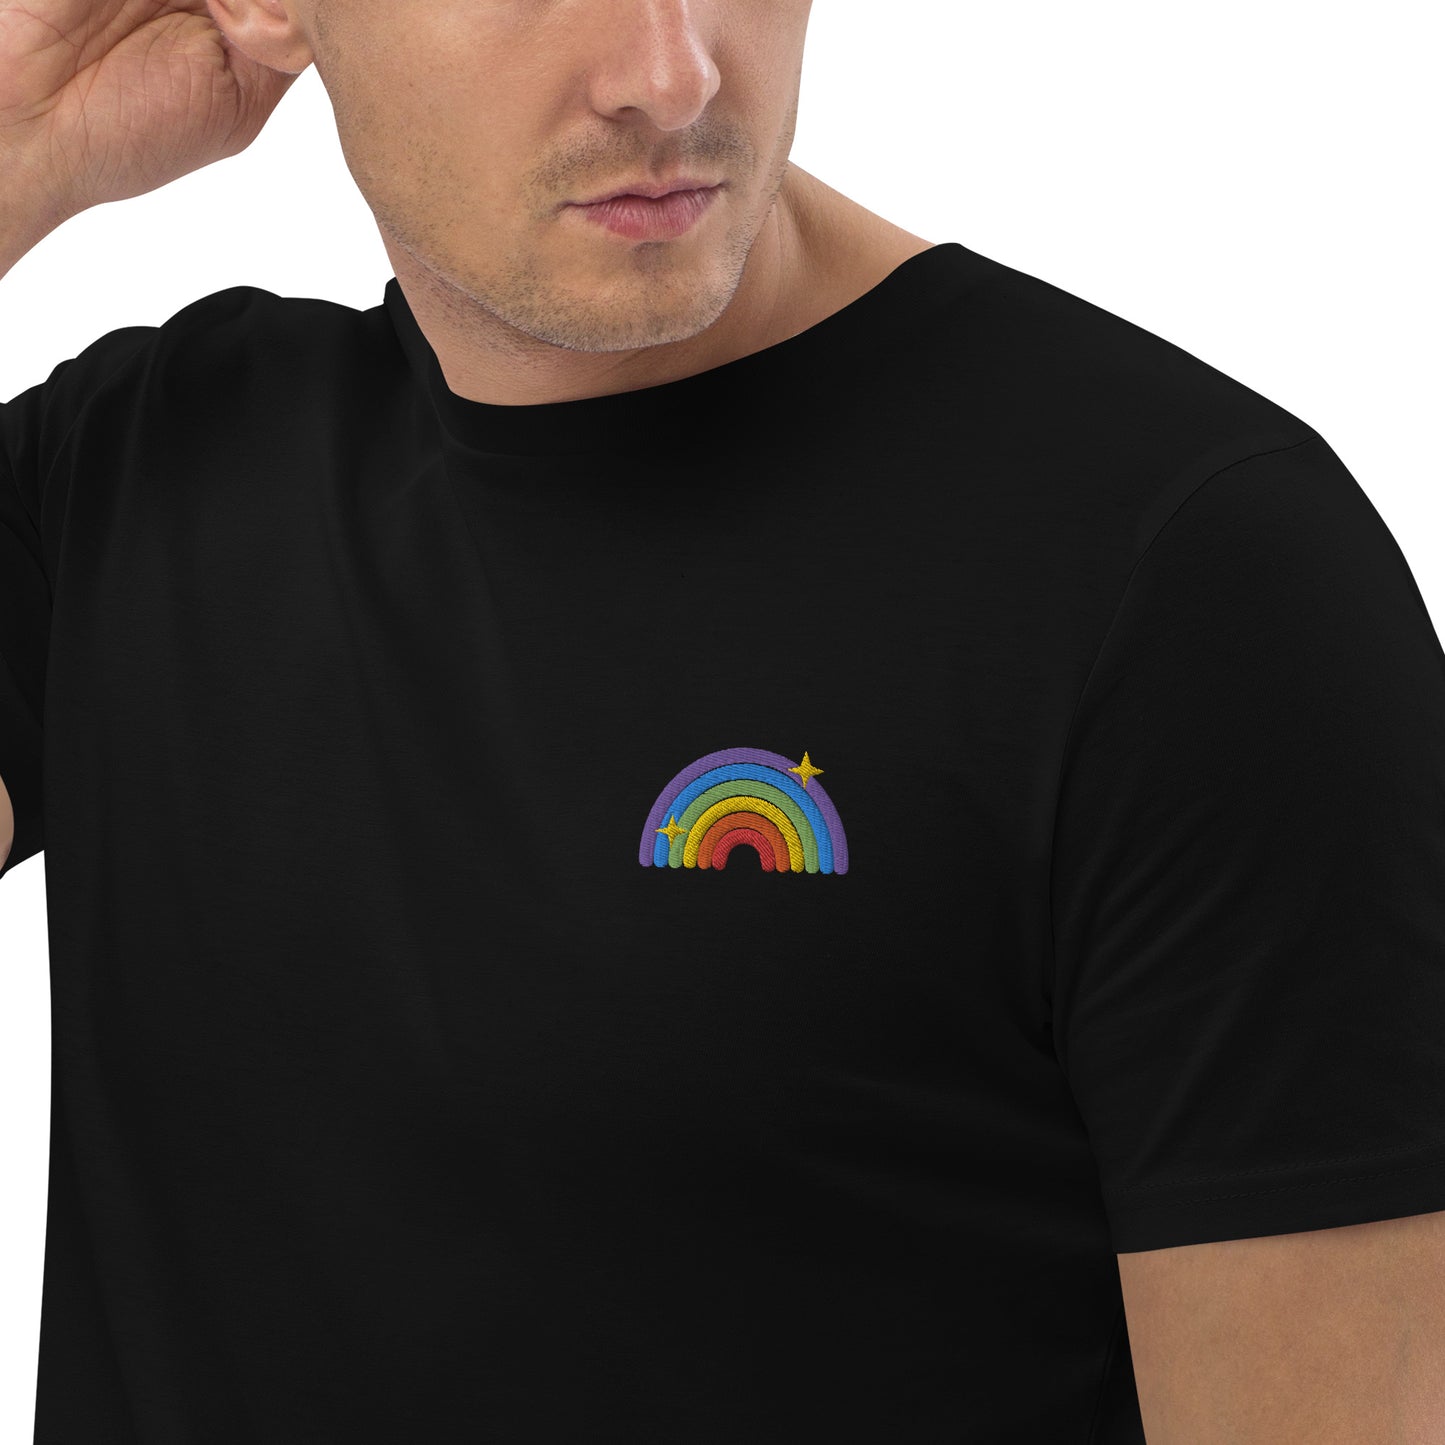 Organic Cotton T-shirt: Queer Rainbow Embroidery